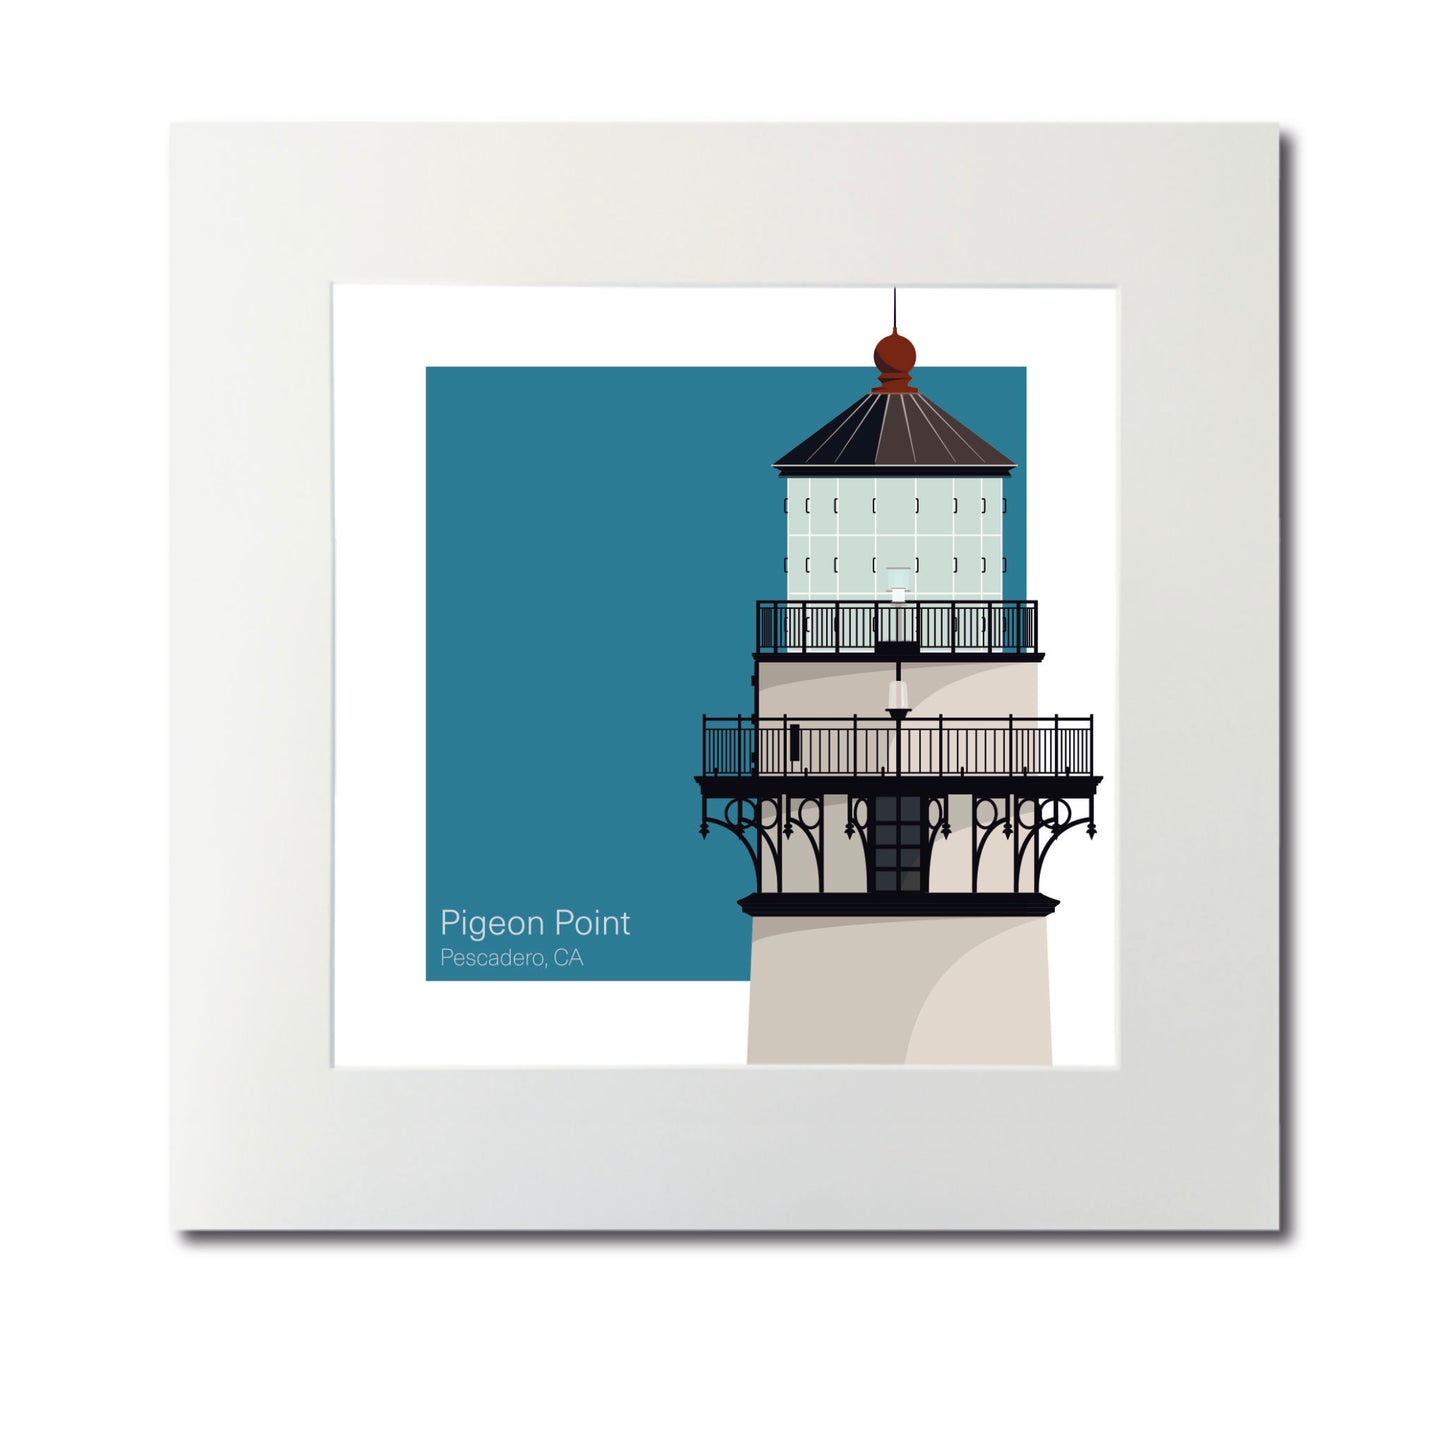 Illustration of the Pigeon Point lighthouse, CA, USA. On a white background with aqua blue square as a backdrop., mounted and measuring 12"x12" (30x30cm).